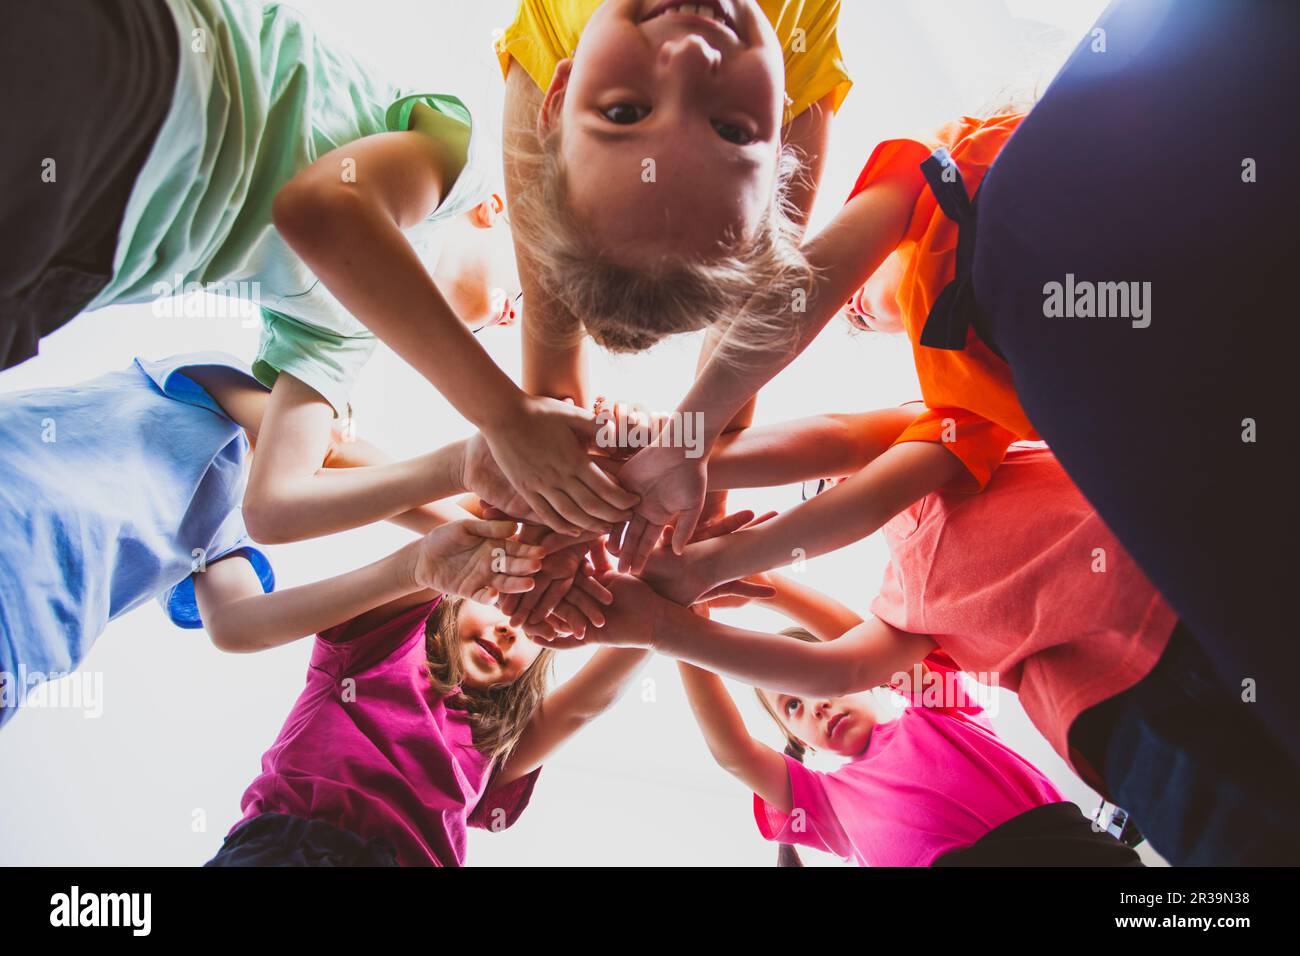 Happy children putting their hands together outdoors. Summer outdoors games and leisure. Stock Photo